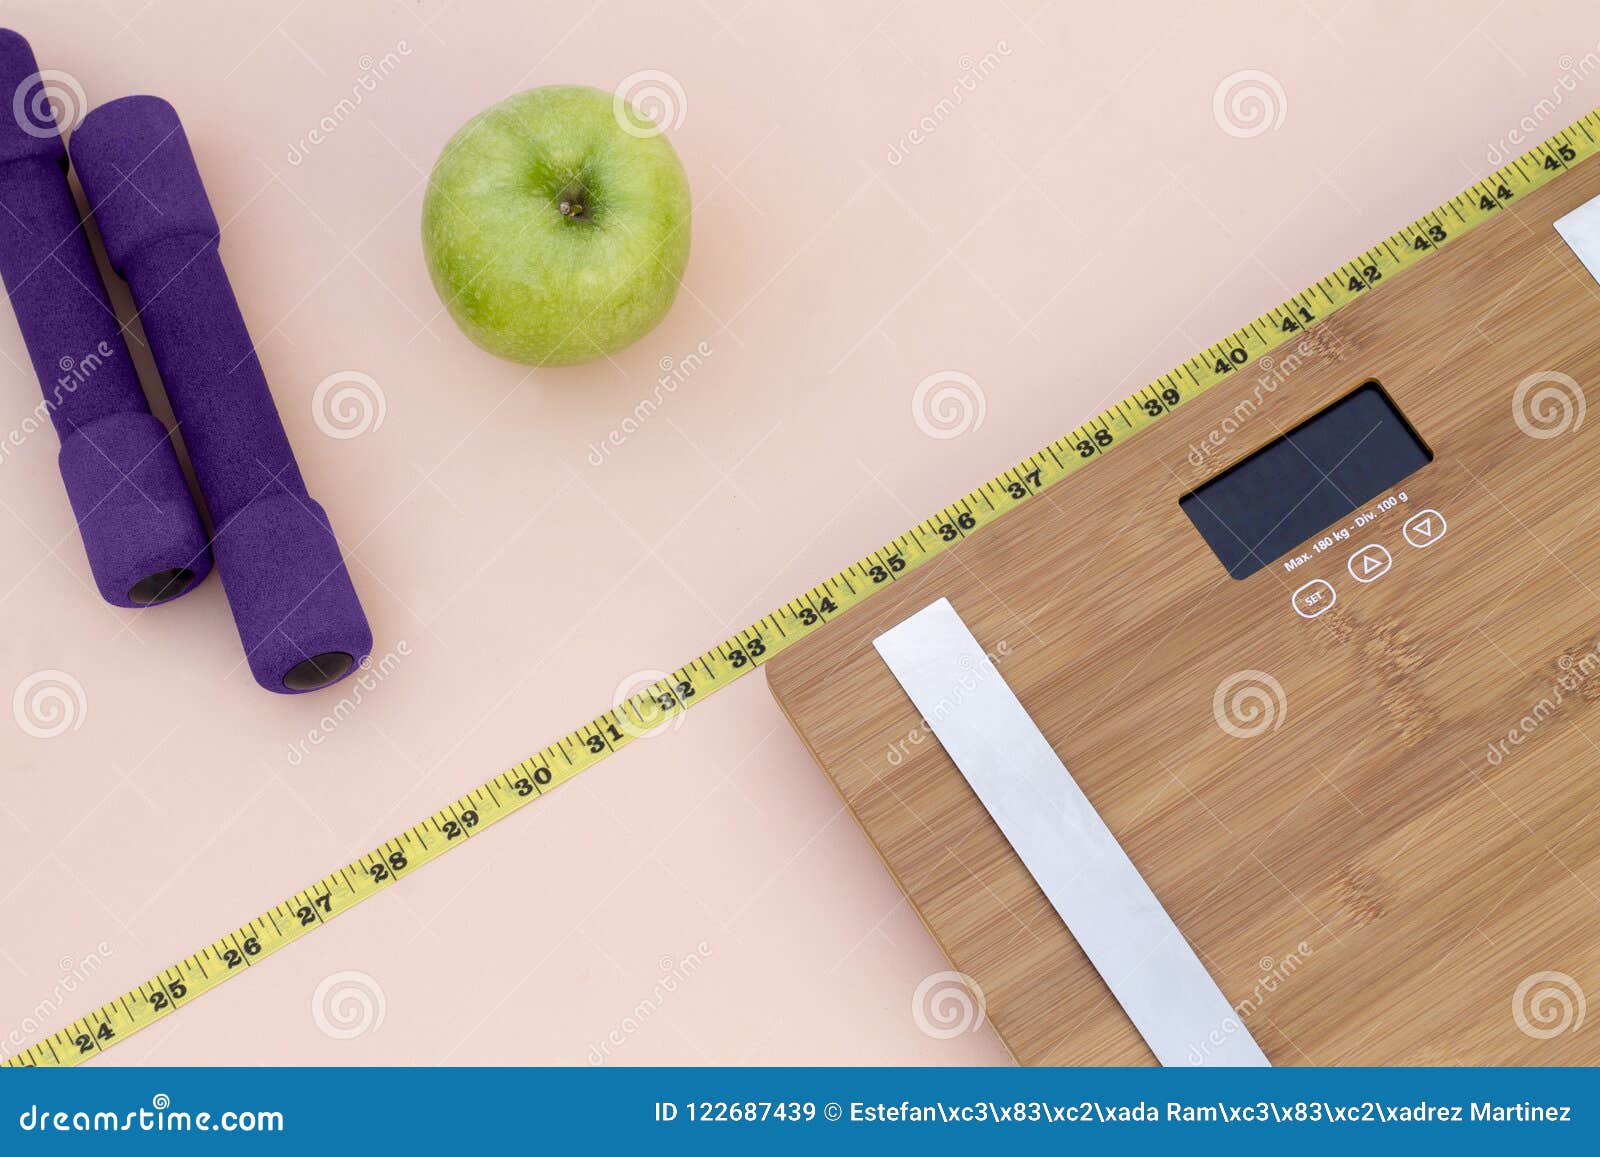 still life photography with a green apple, weight tape measure and a scale